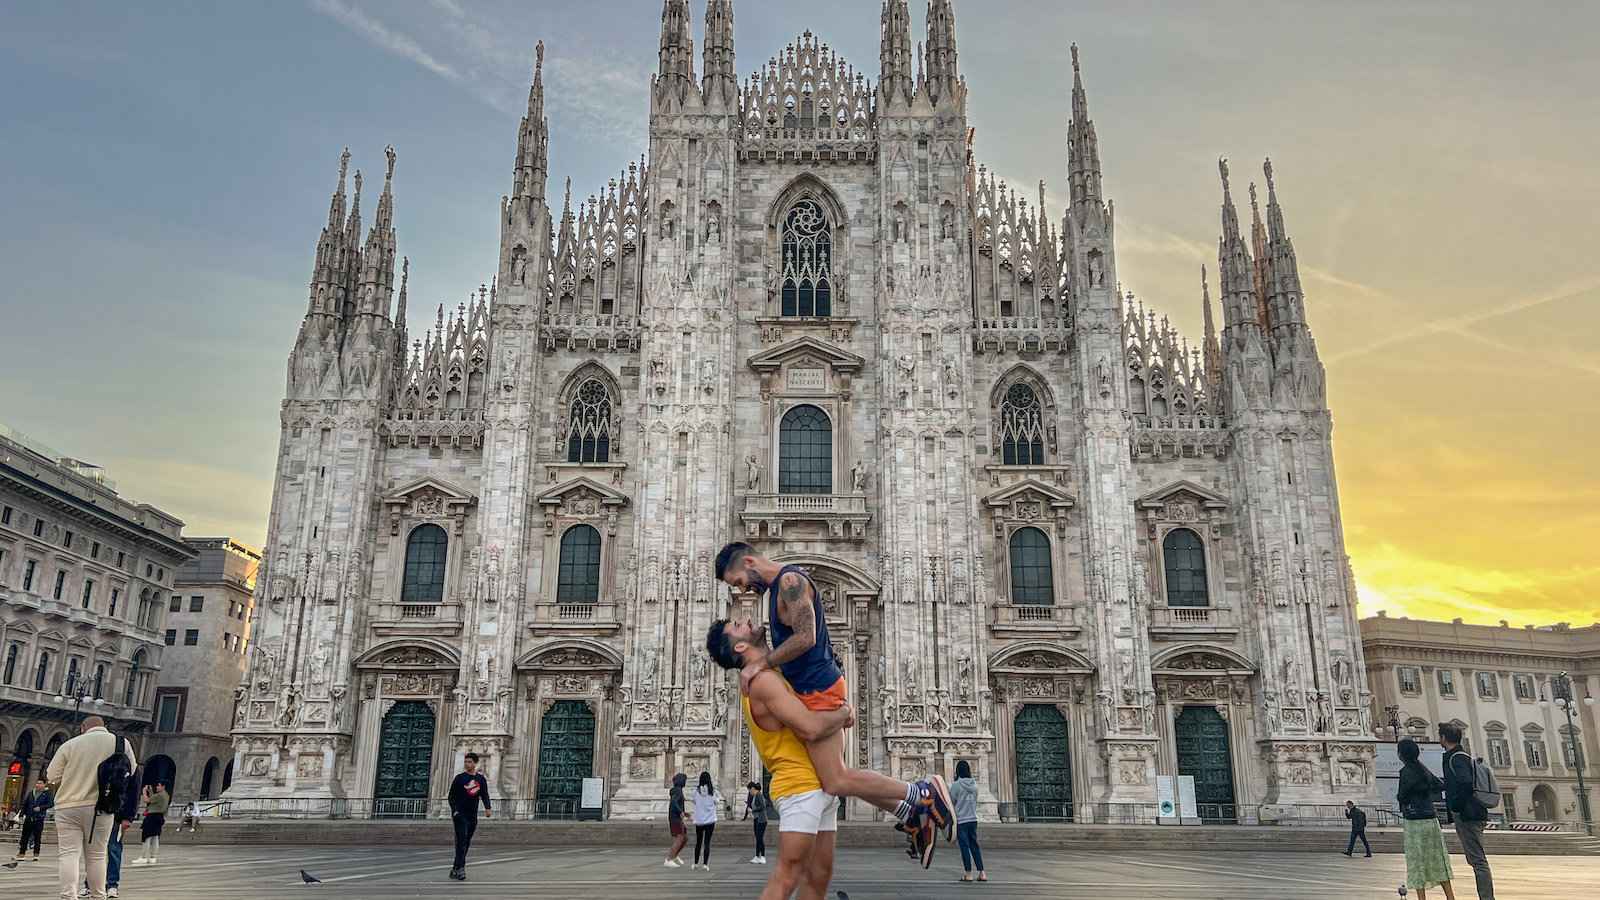 A gay couple with one man lifting the other up in front of the Milan Cathedral.